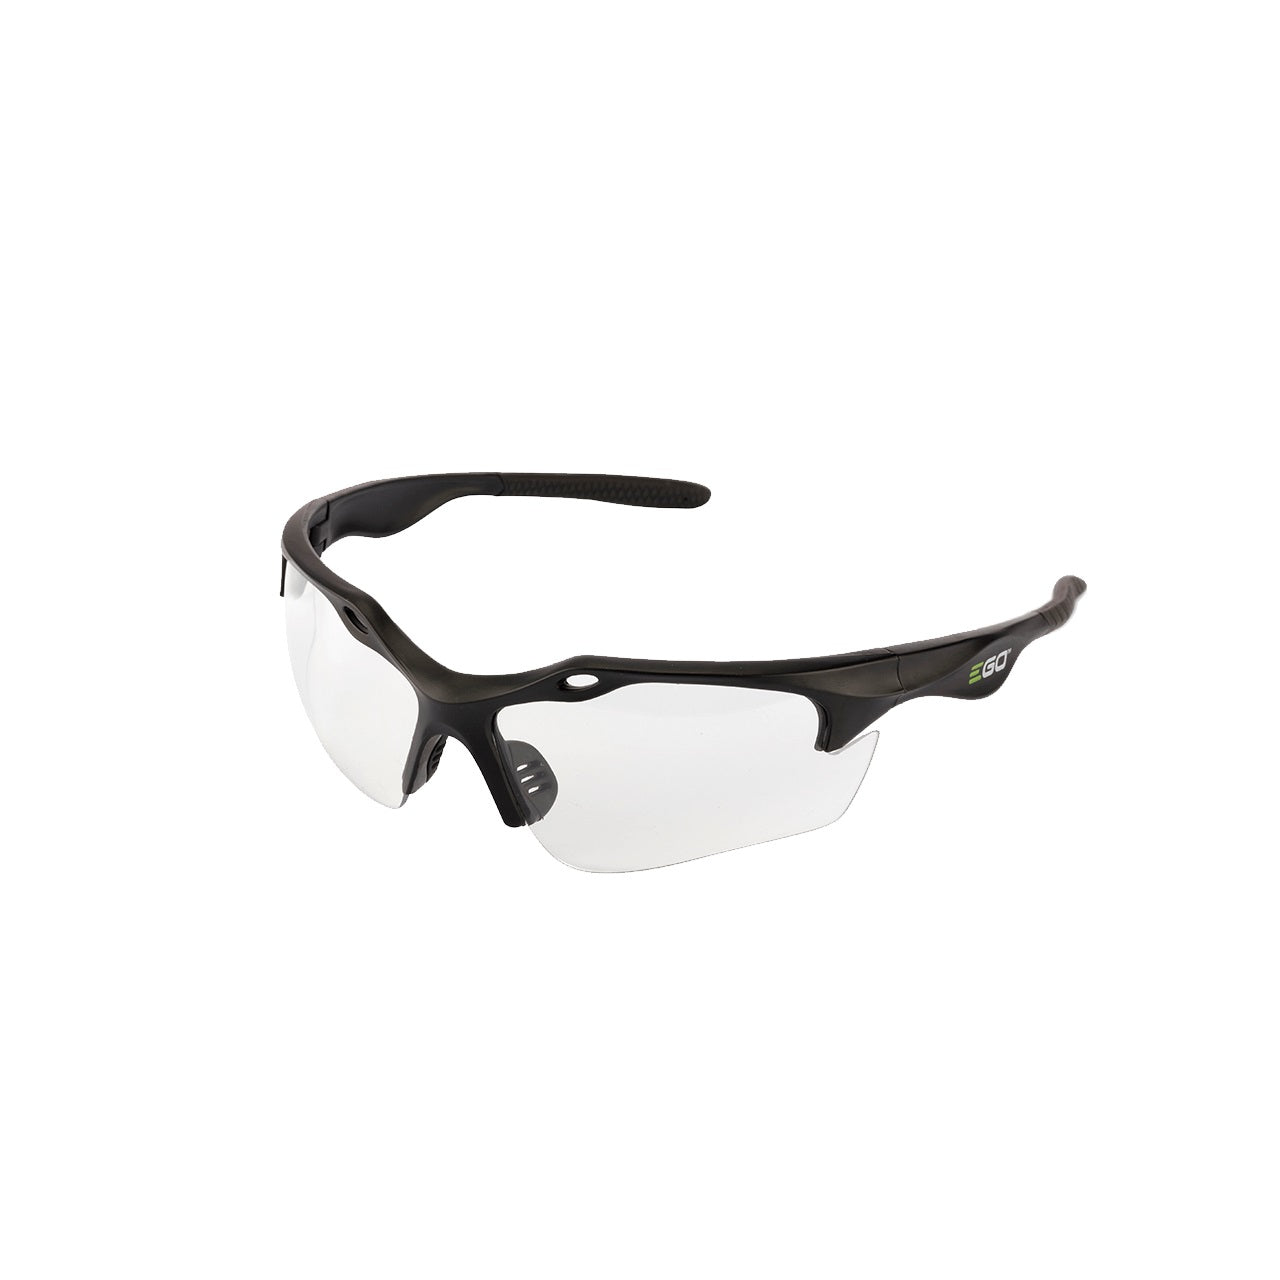 EGO GS001 Safety Glasses Clear